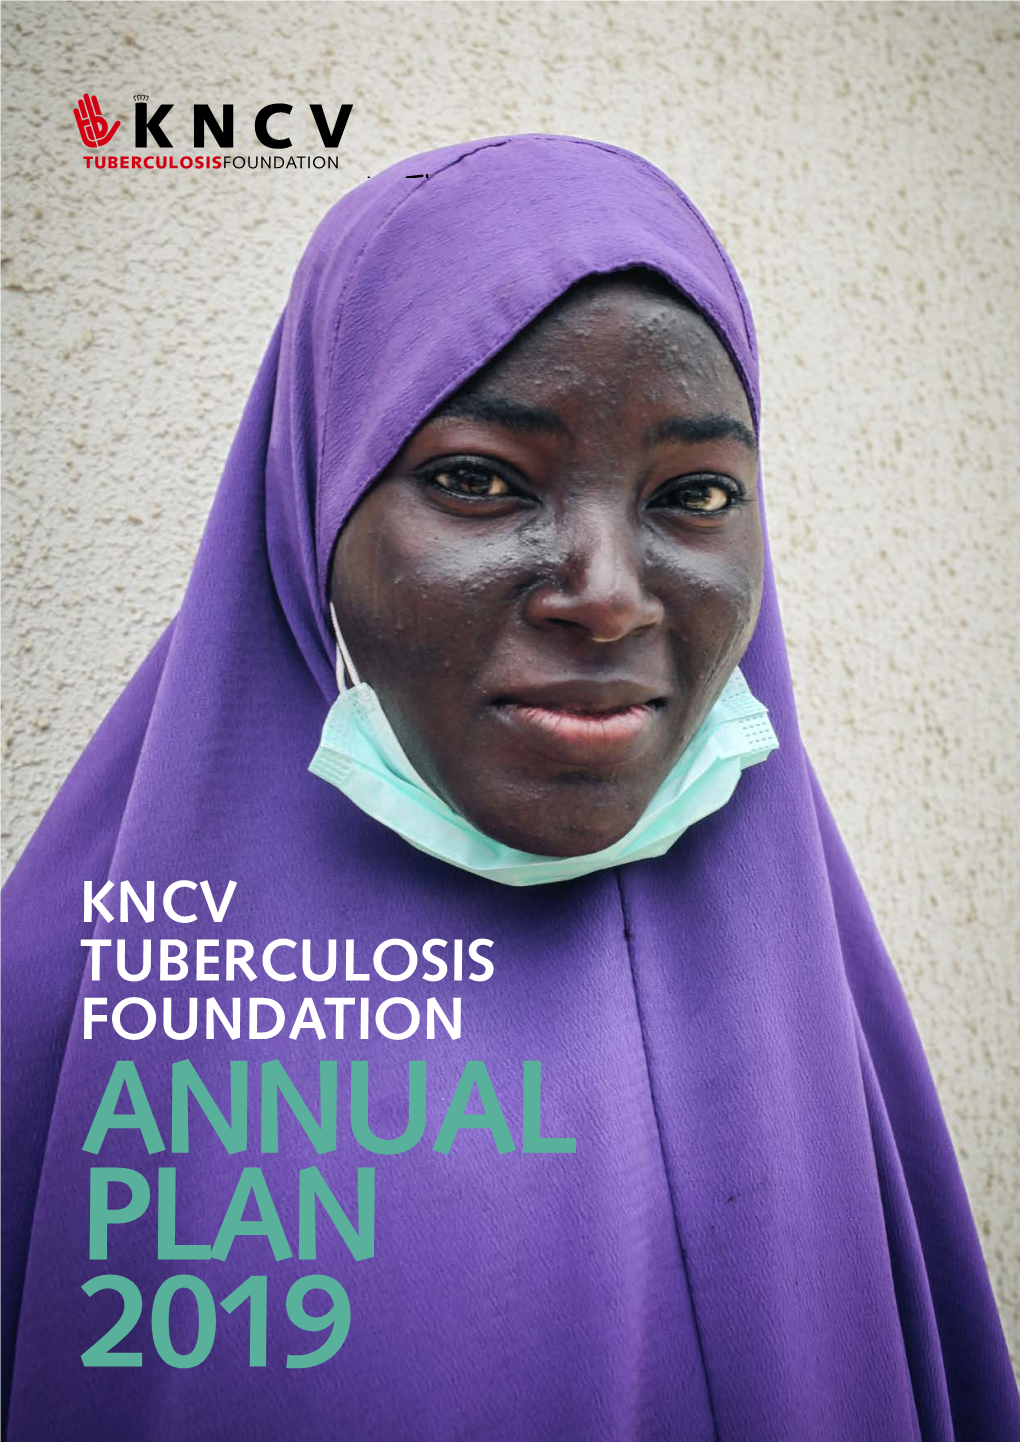 Kncv Tuberculosis Foundation Annual Plan 2019 Contents